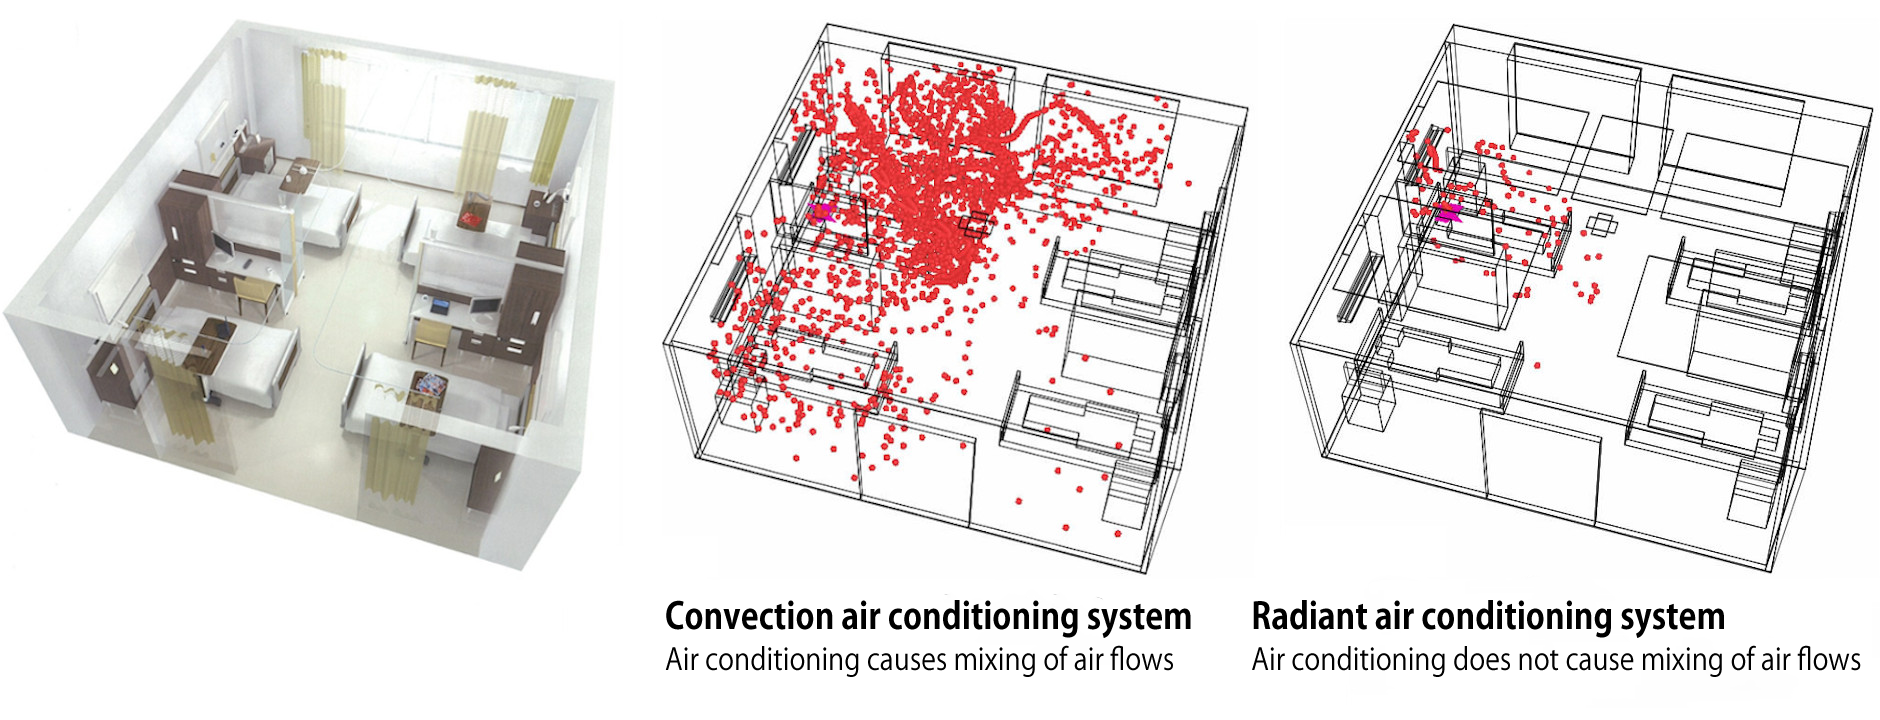 Dispersion of microparticles with a convection air conditioning system and a radiant air conditioning system （simulation）